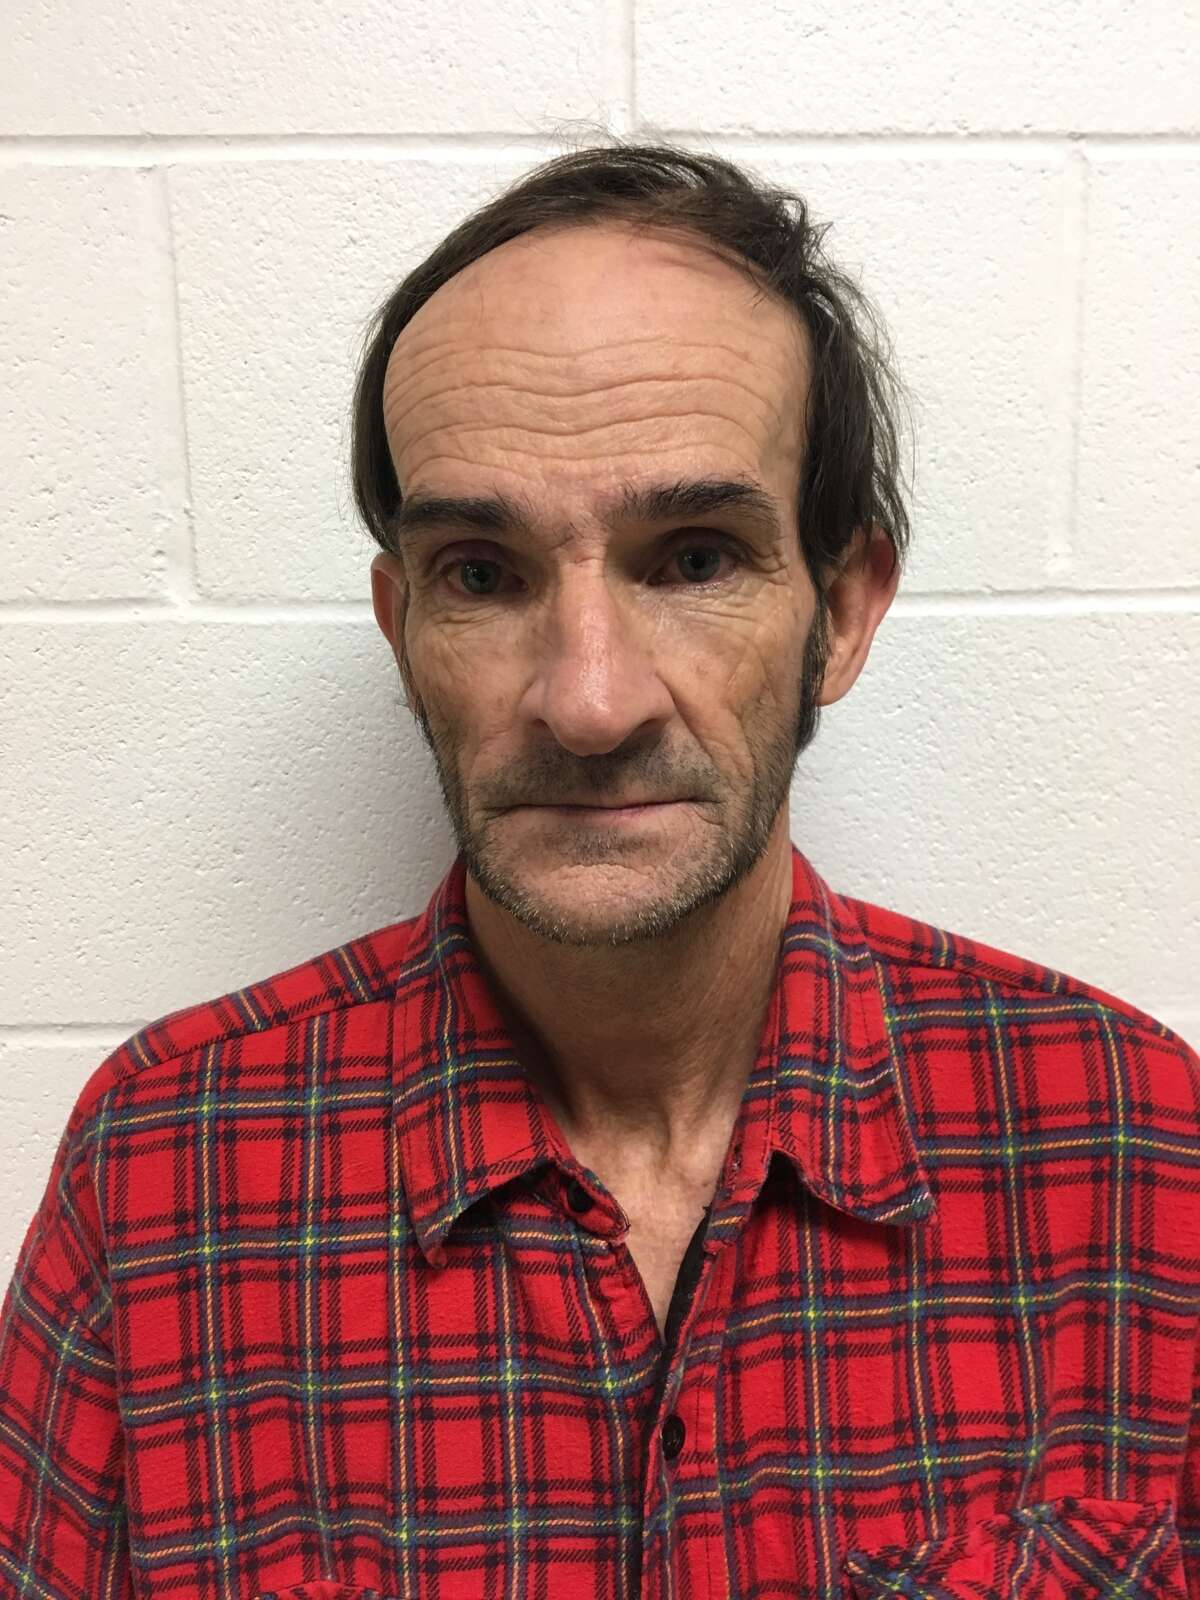 Robert Fry, 54, was arrested on three counts of possession of child pornography.